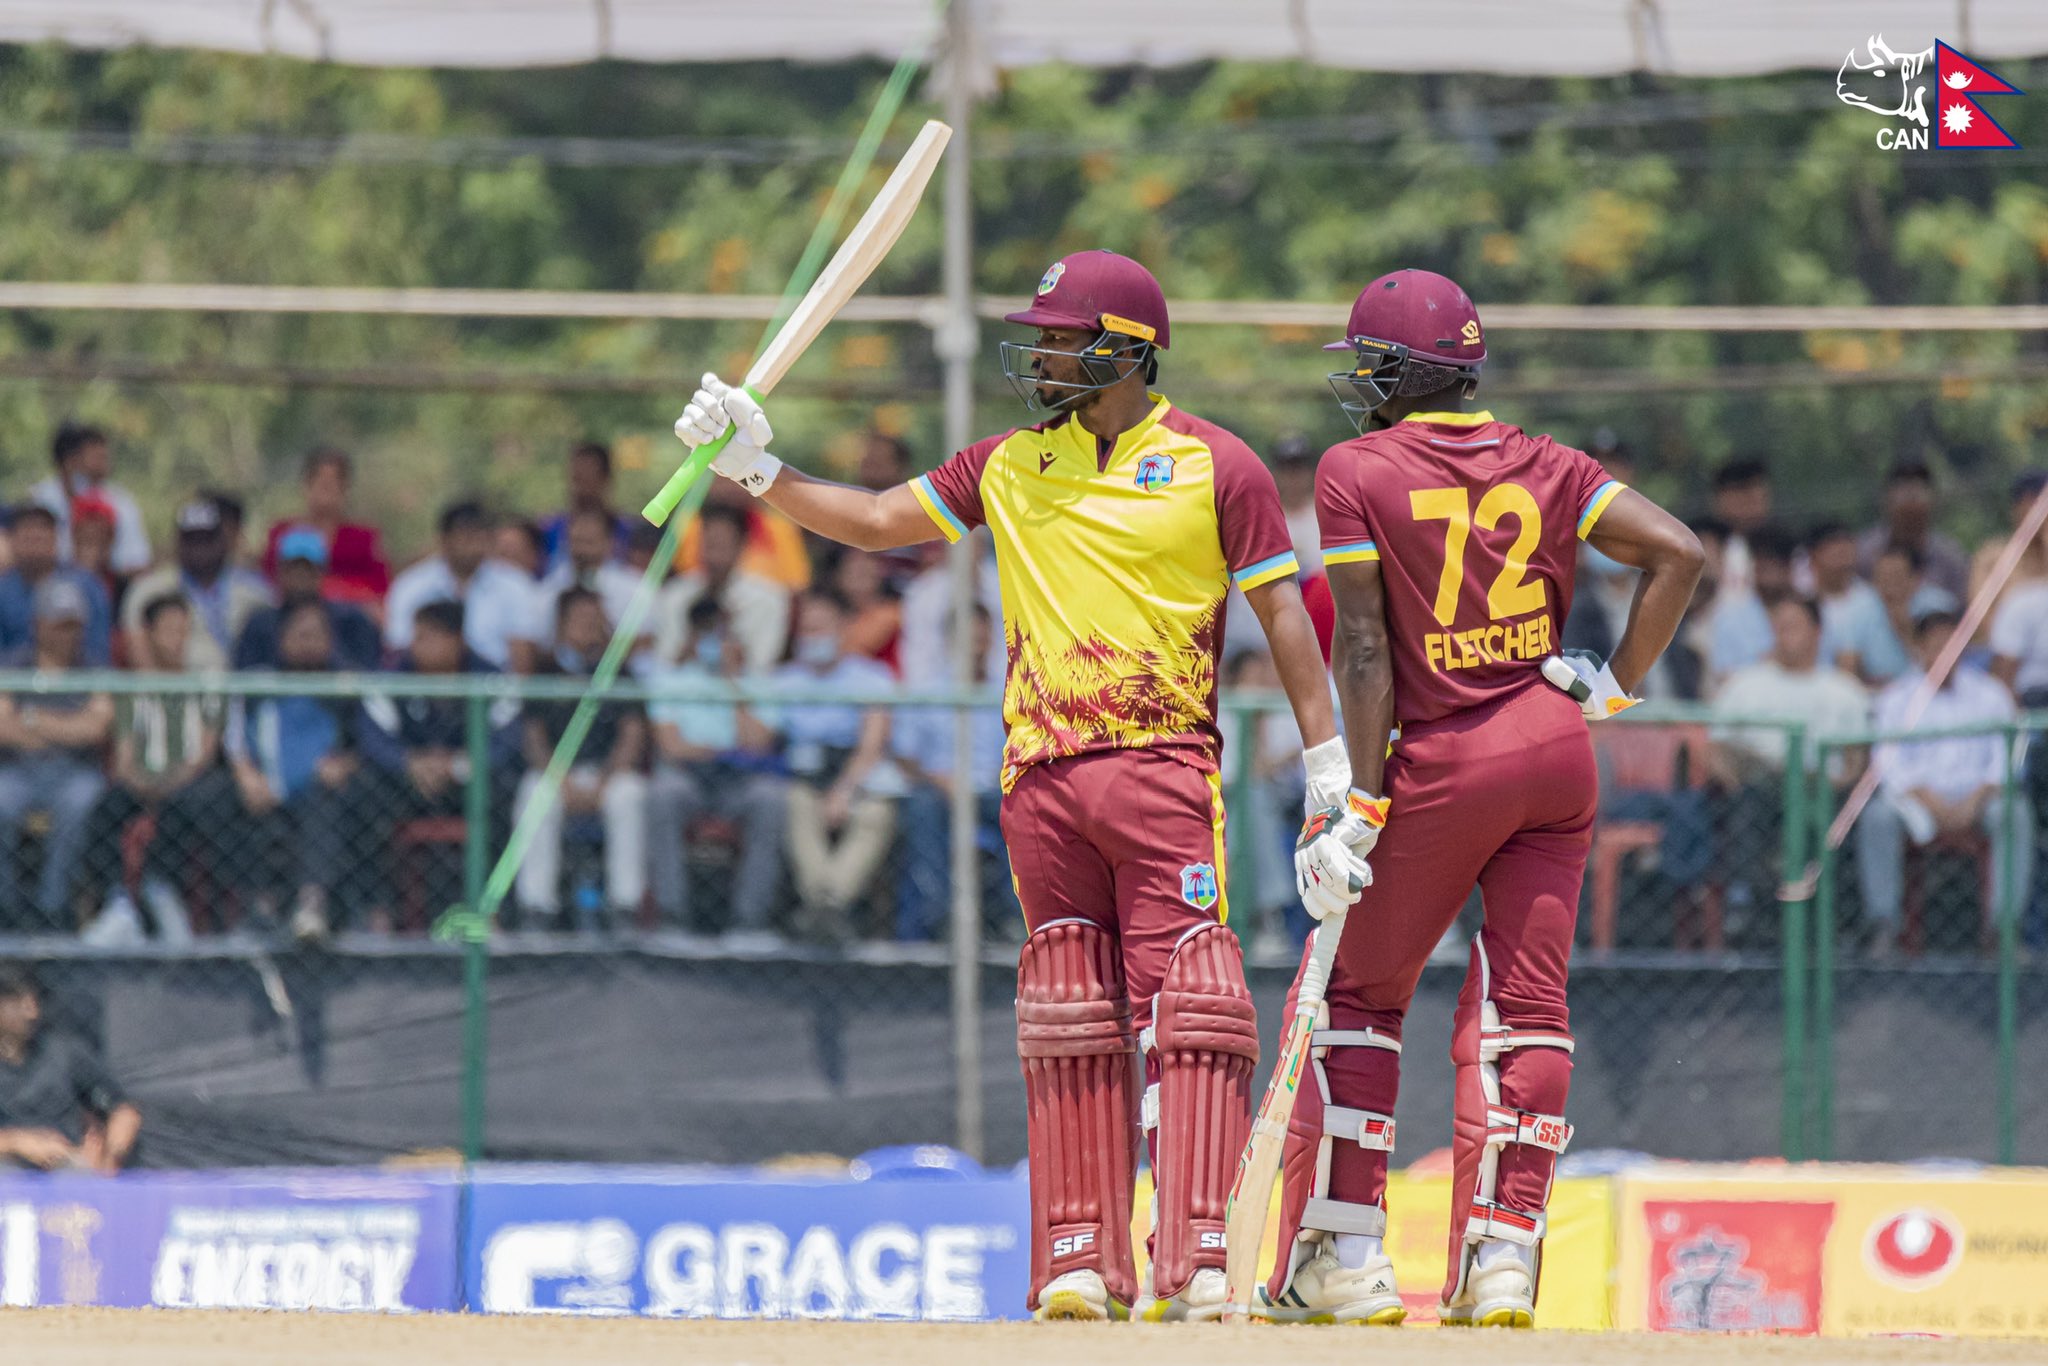 West Indies ‘A’ clinches series title with one game remaining (with photos)